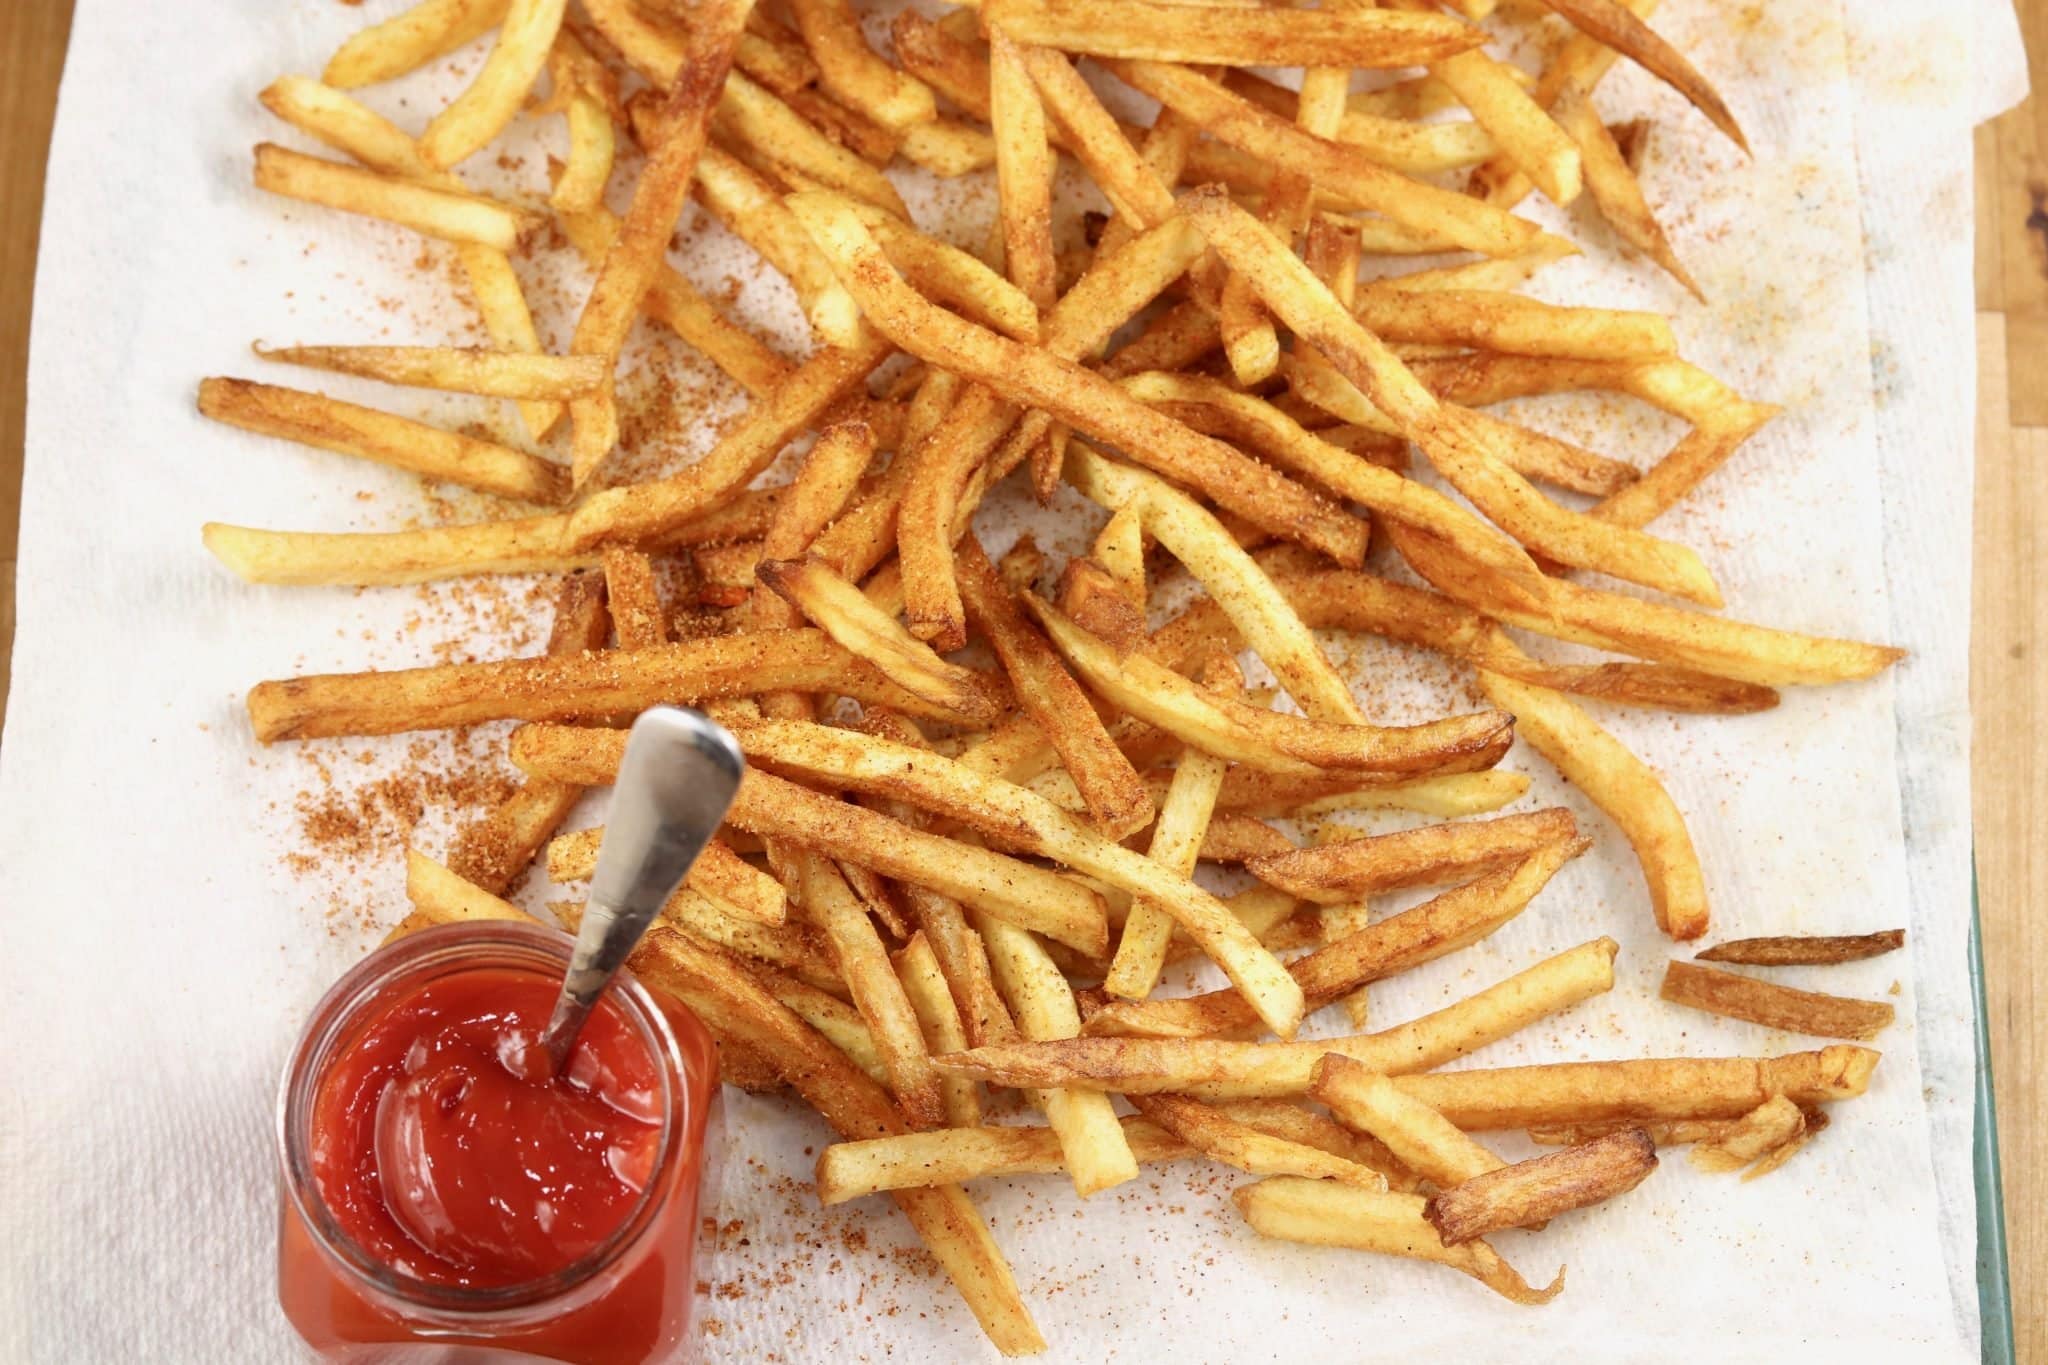 French fries on a baking sheet with ketchup.